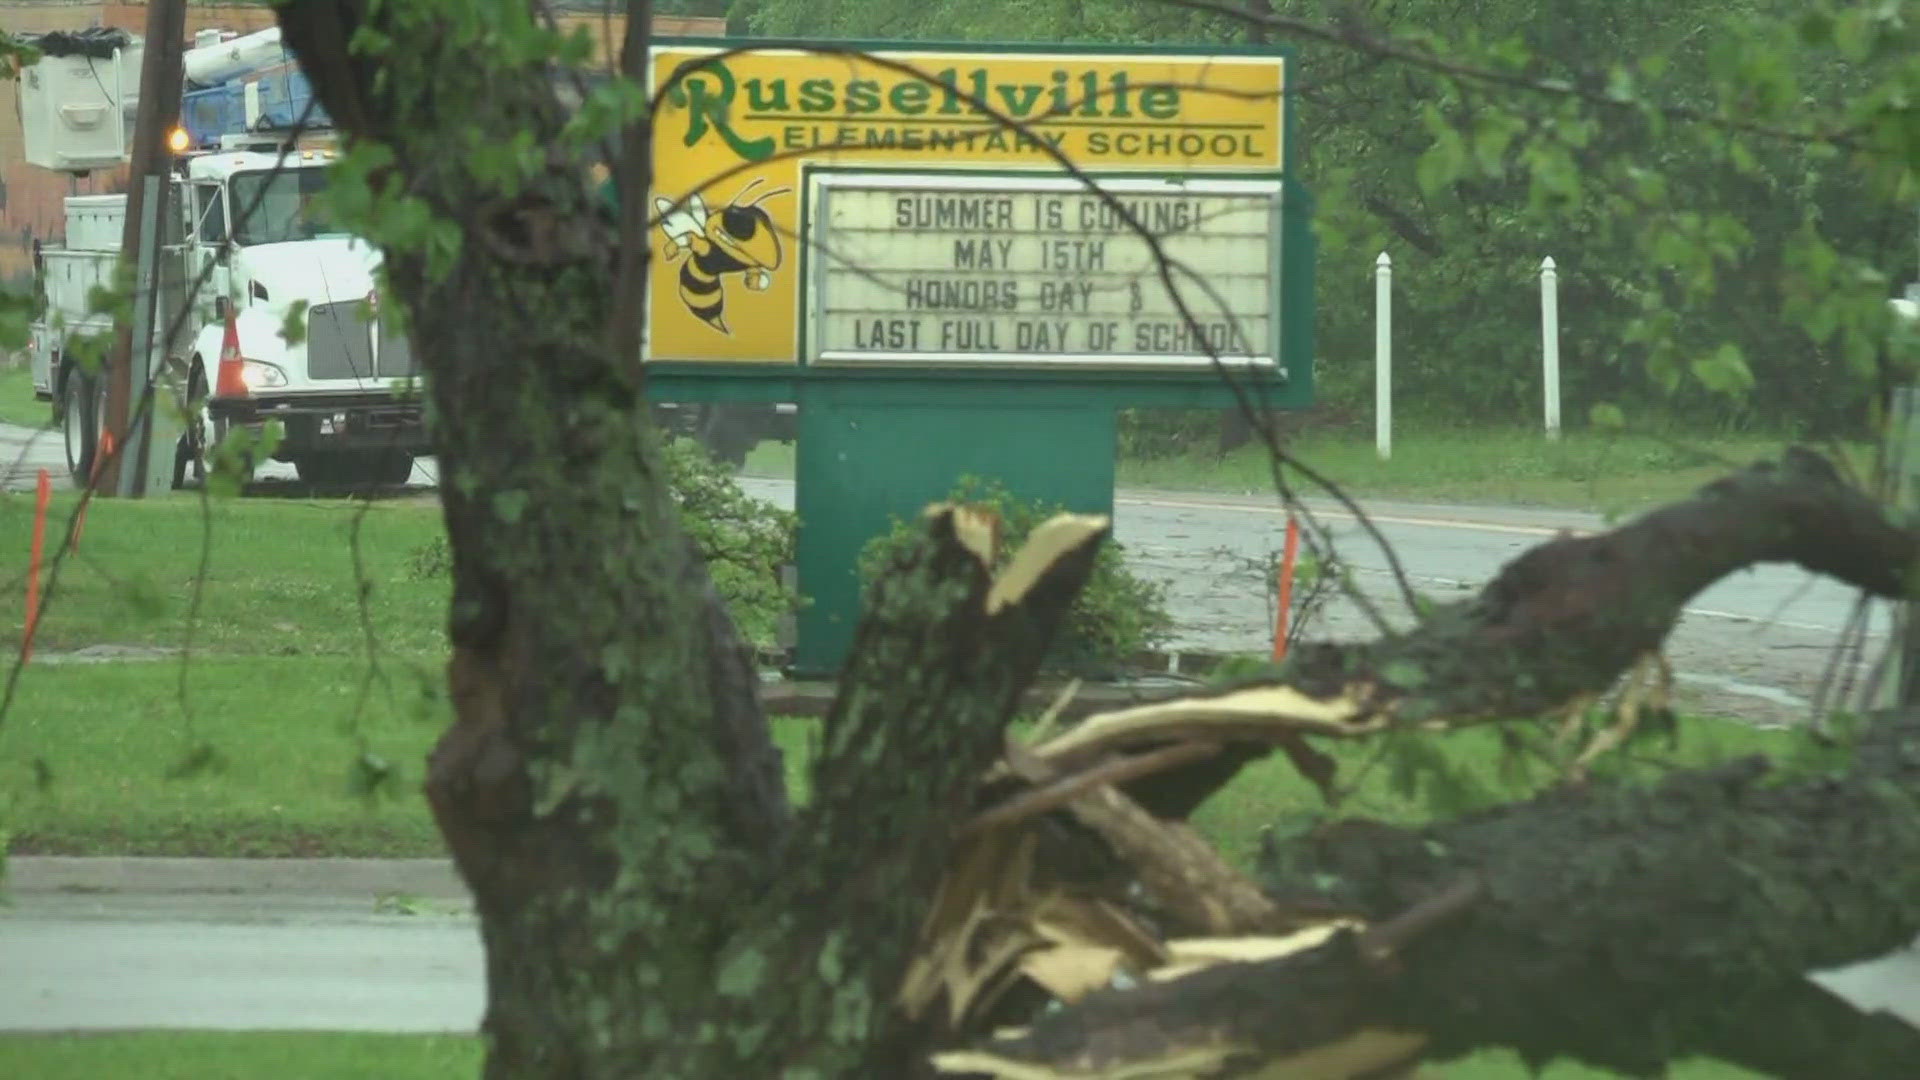 The storms damaged Russellville Elementary School in Hamblen County.